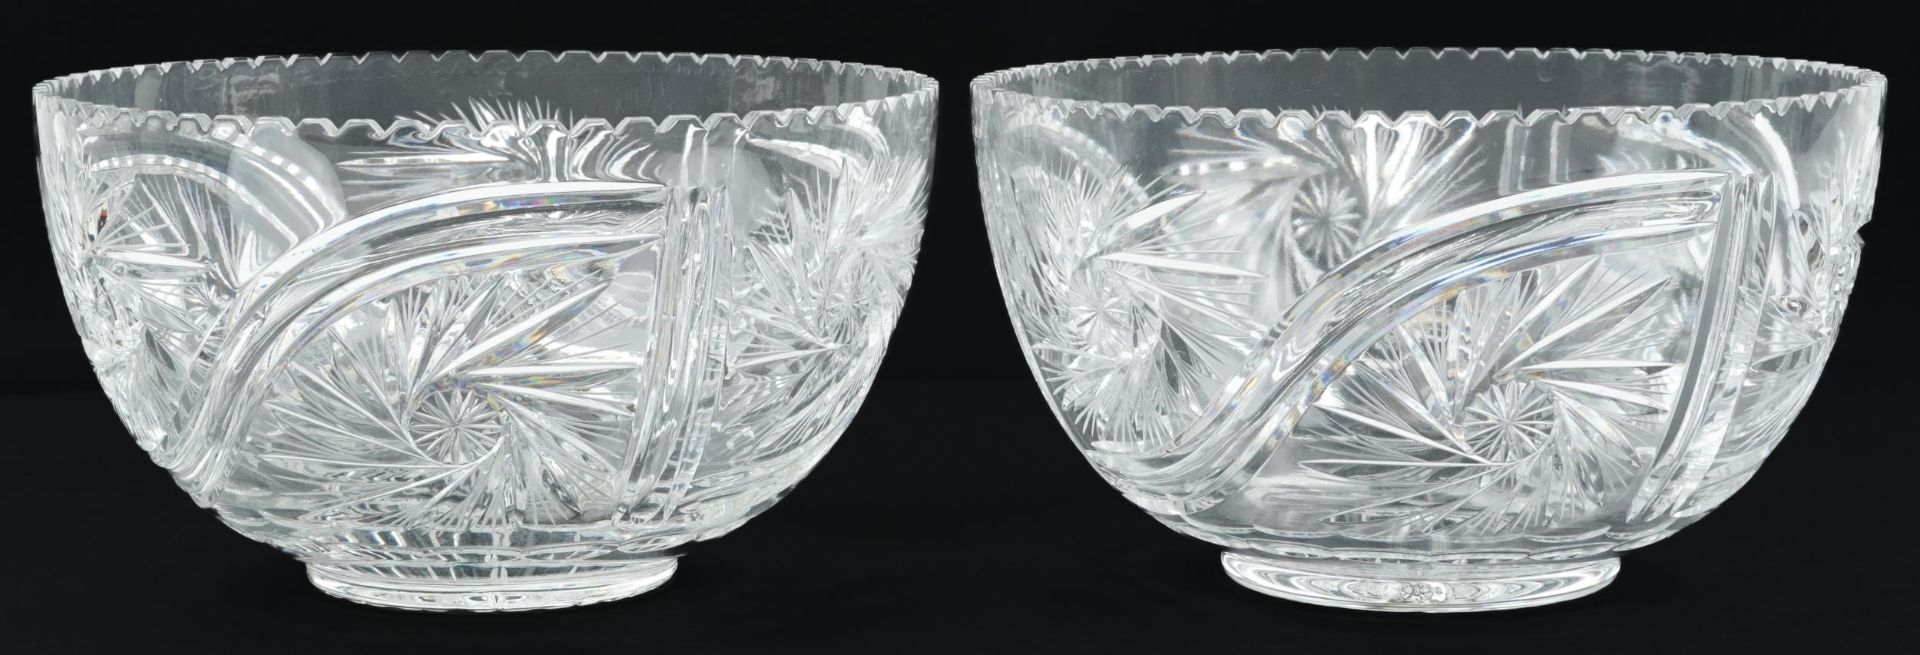 Large pair of good quality glass bowls cut with wheel design and star bases, each 29cm in diameter - Image 2 of 3